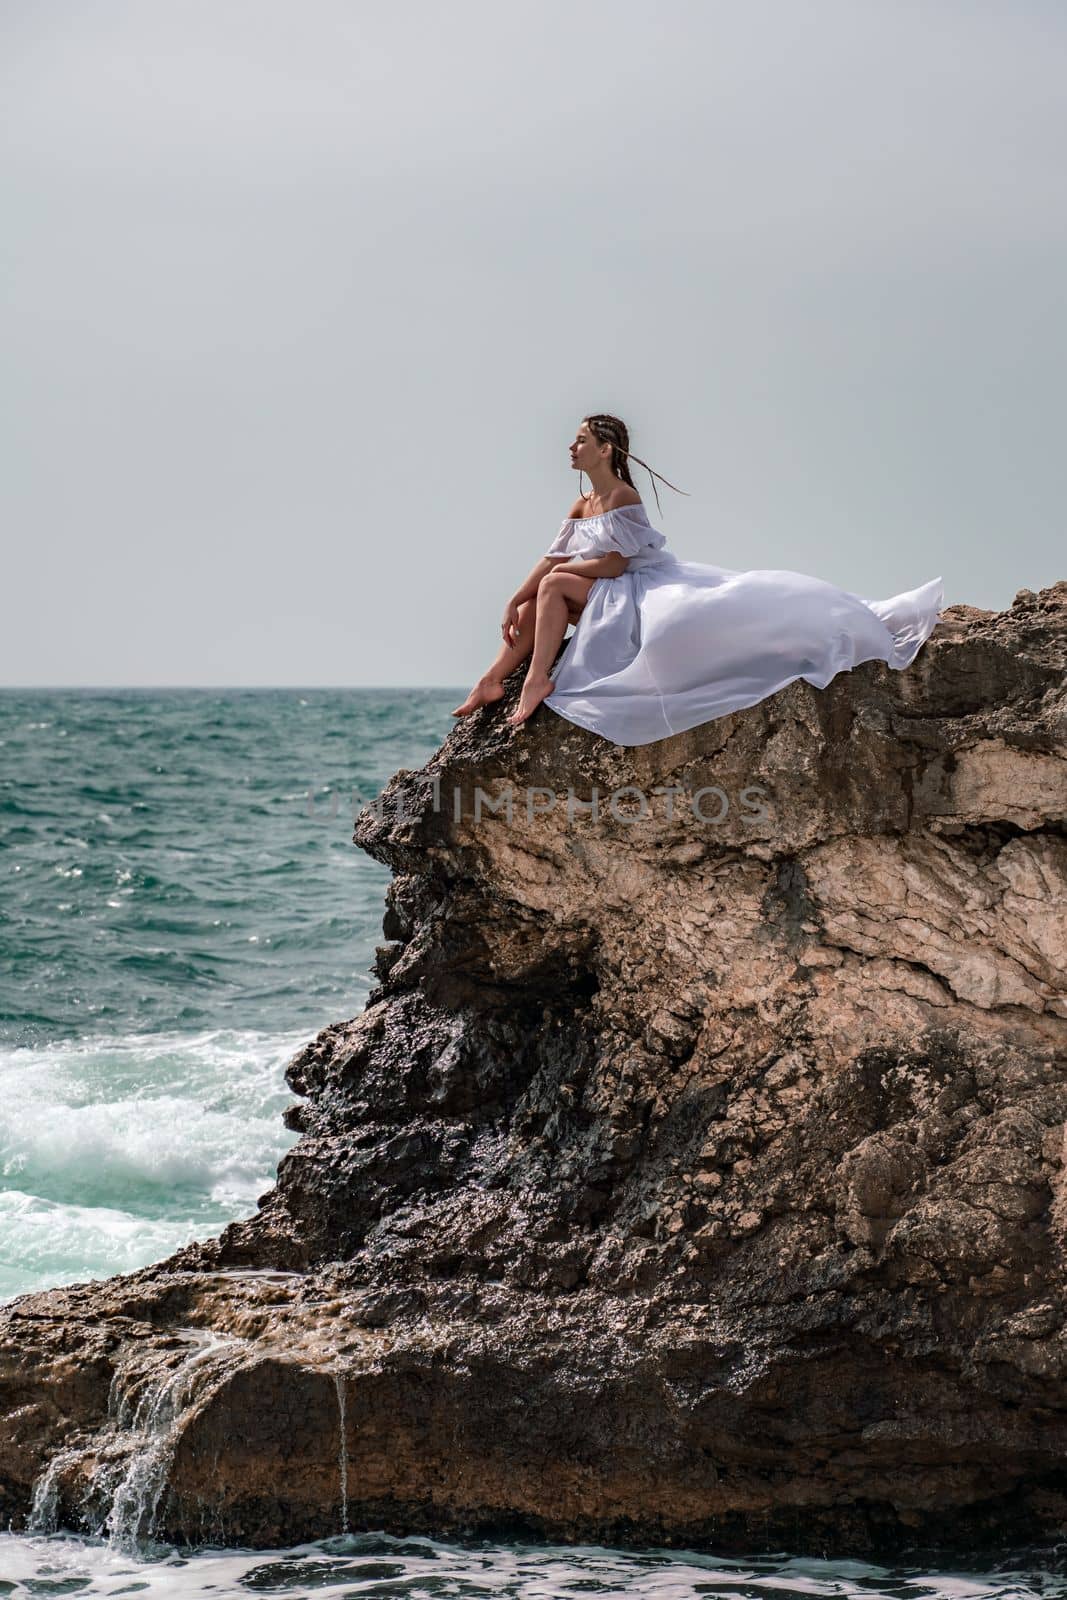 A woman in a storm sits on a stone in the sea. Dressed in a white long dress, waves crash against the rocks and white spray rises